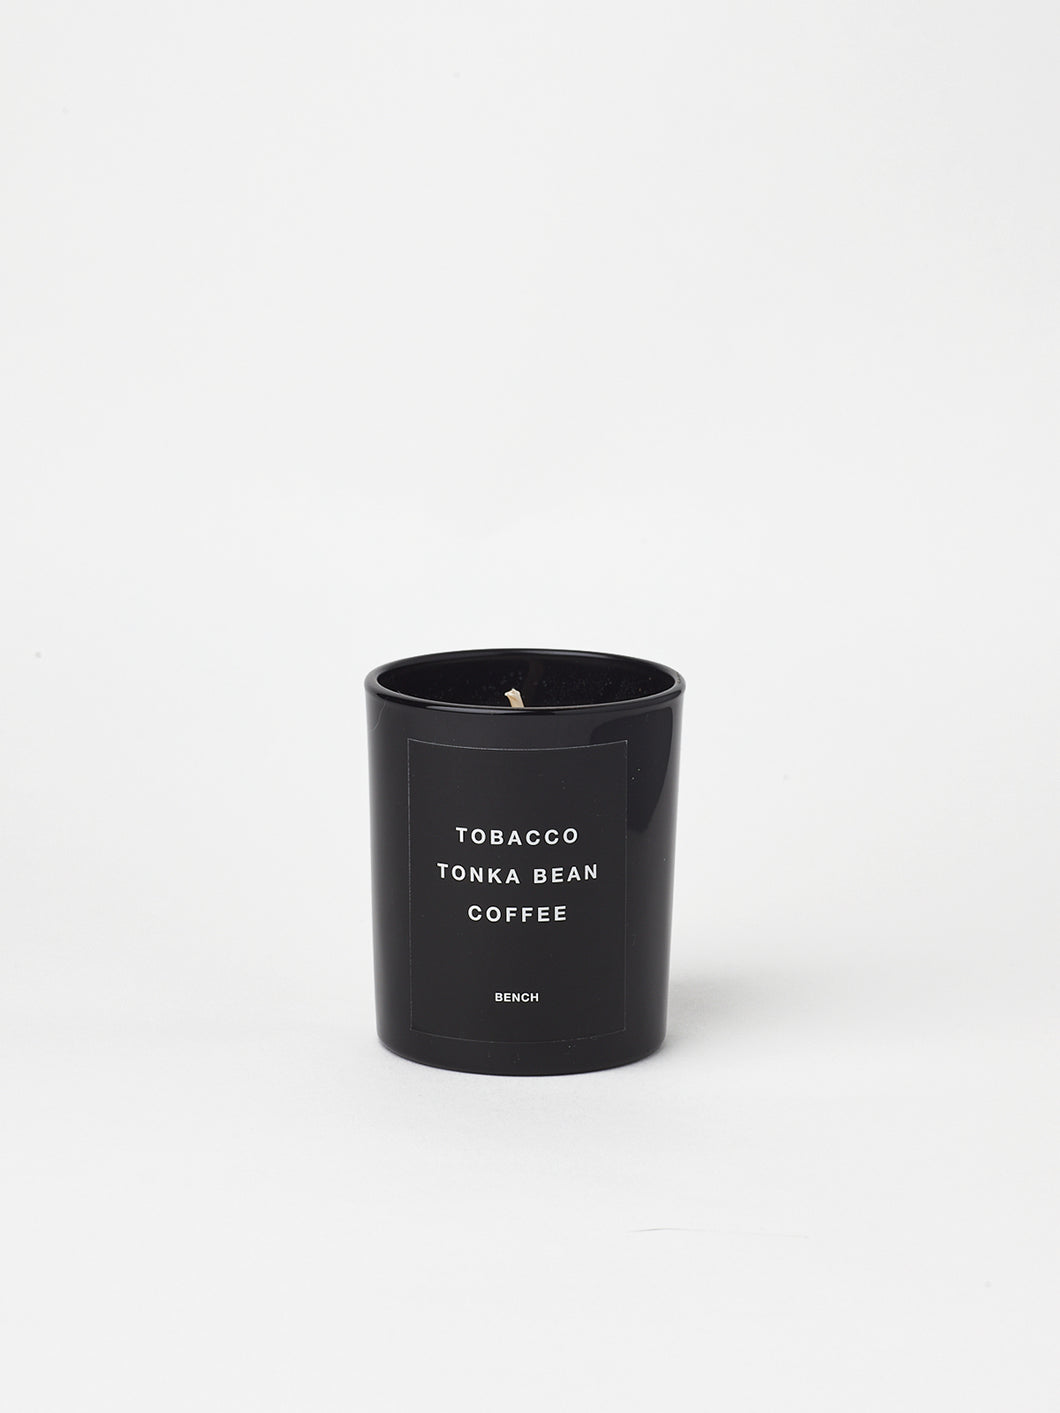 BENCH COFFEE CO. scented candle, 